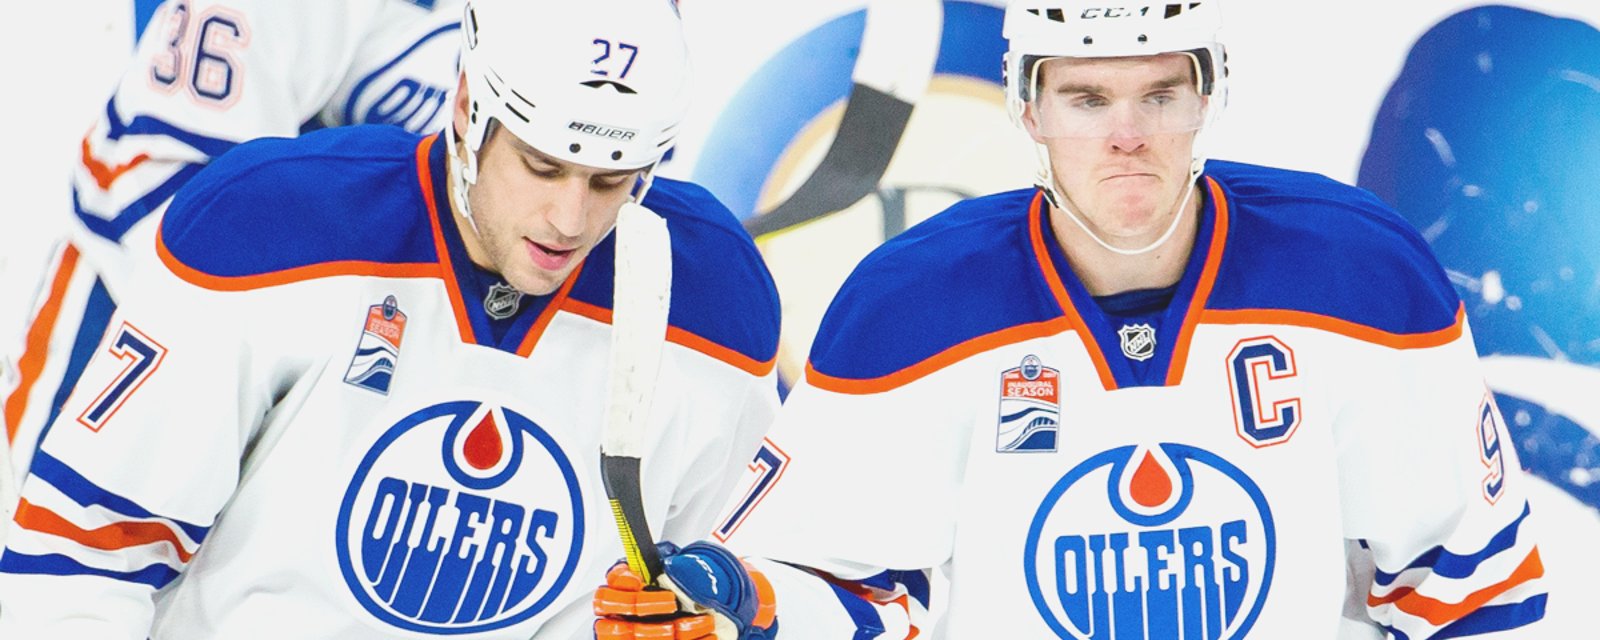 Connor McDavid had a POWERFUL message to deliver following the Oilers elimination.